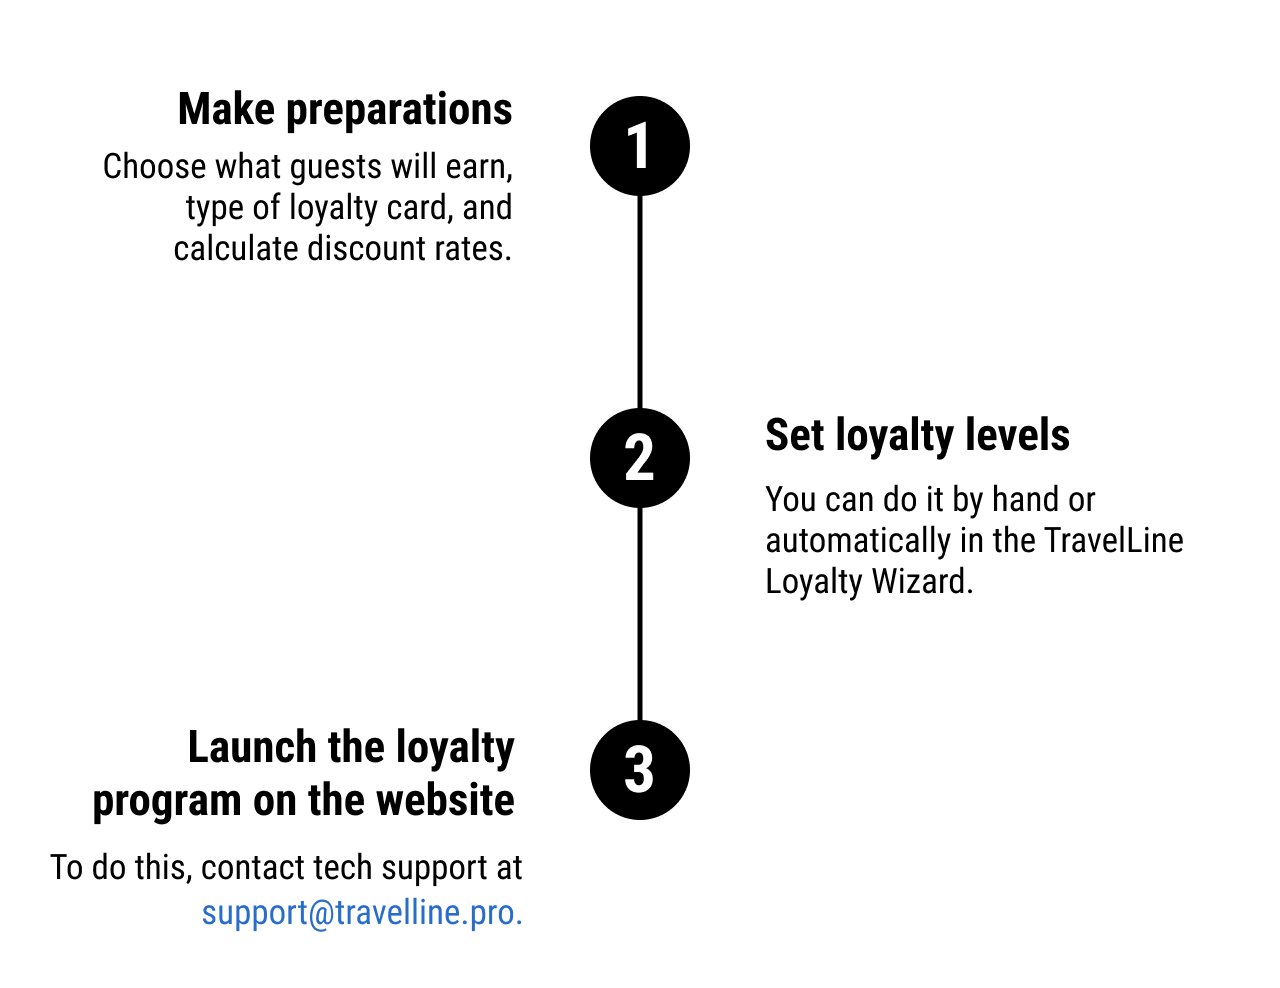 How to launch the loyalty program management system TravelLine Loyalty